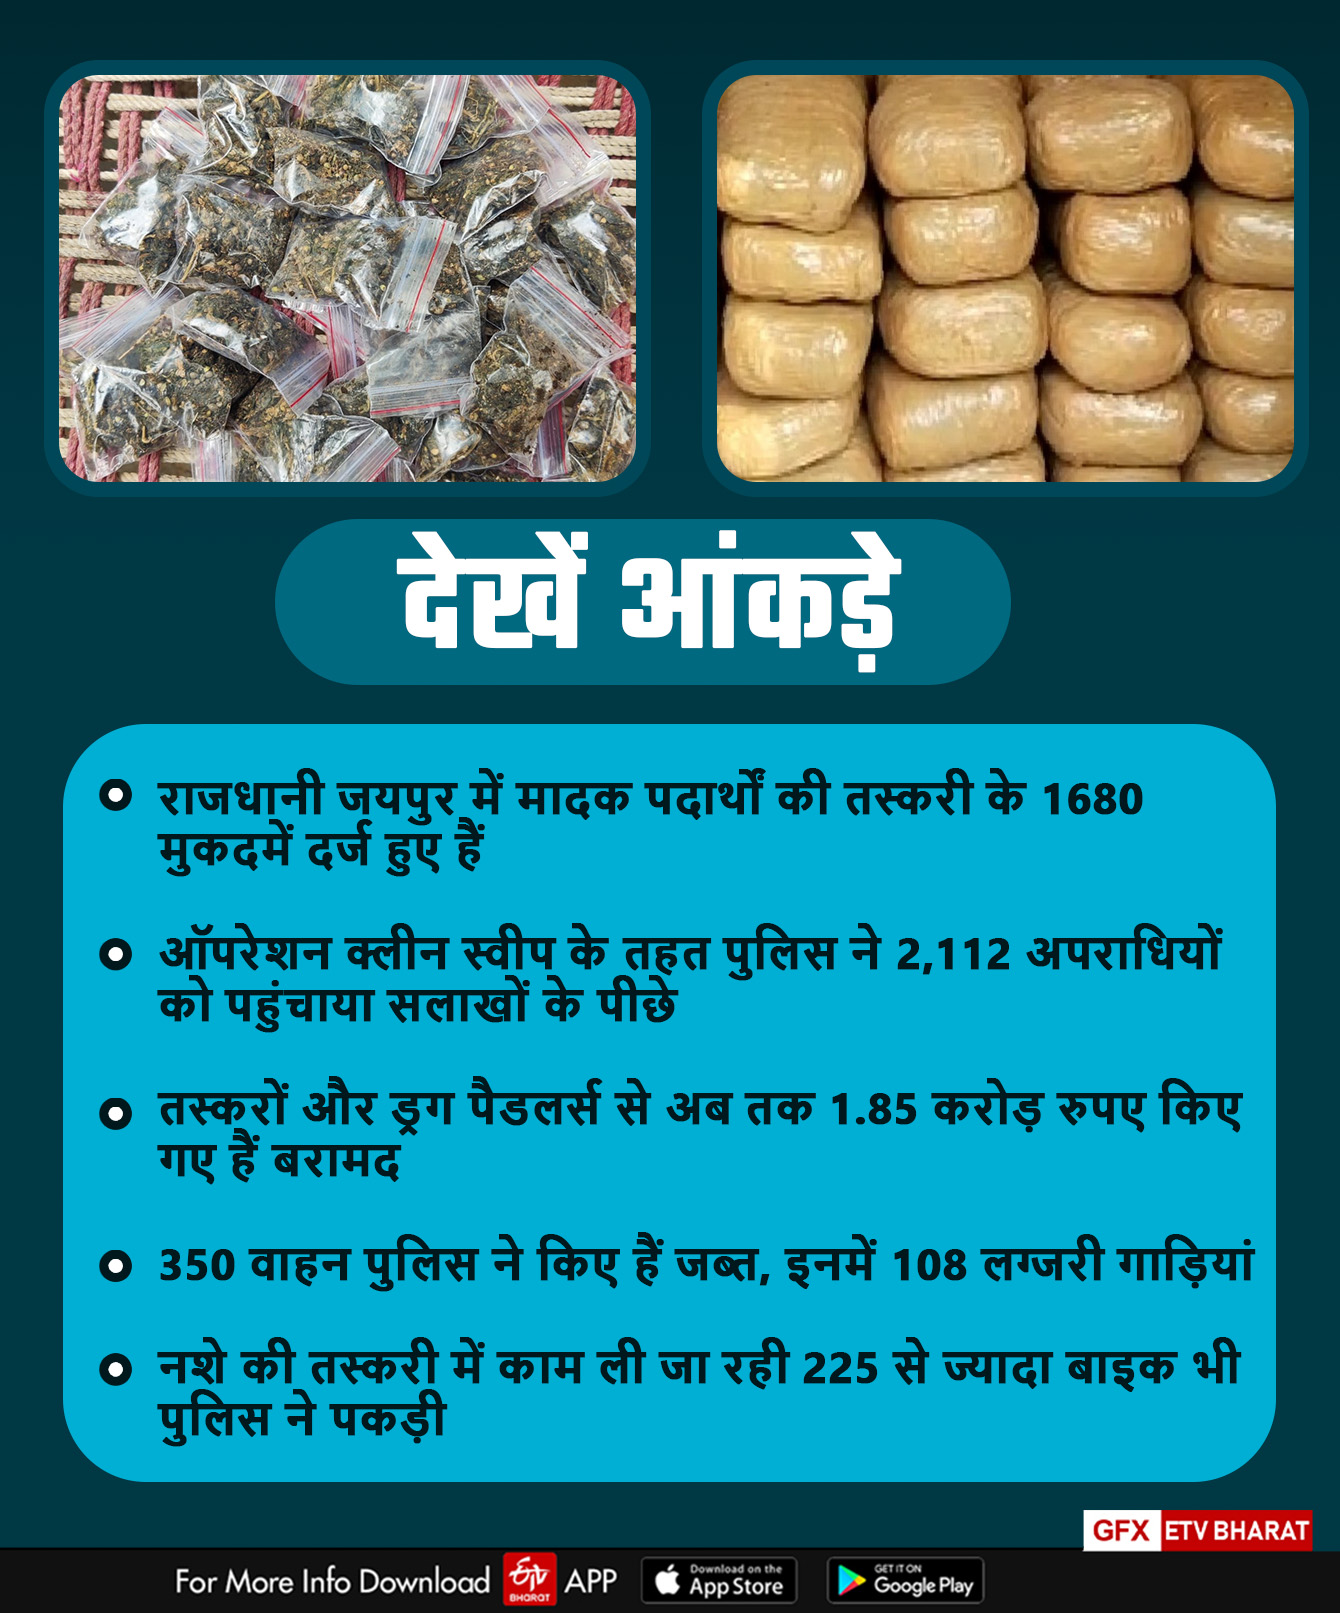 Action against Smuggling in Rajasthan